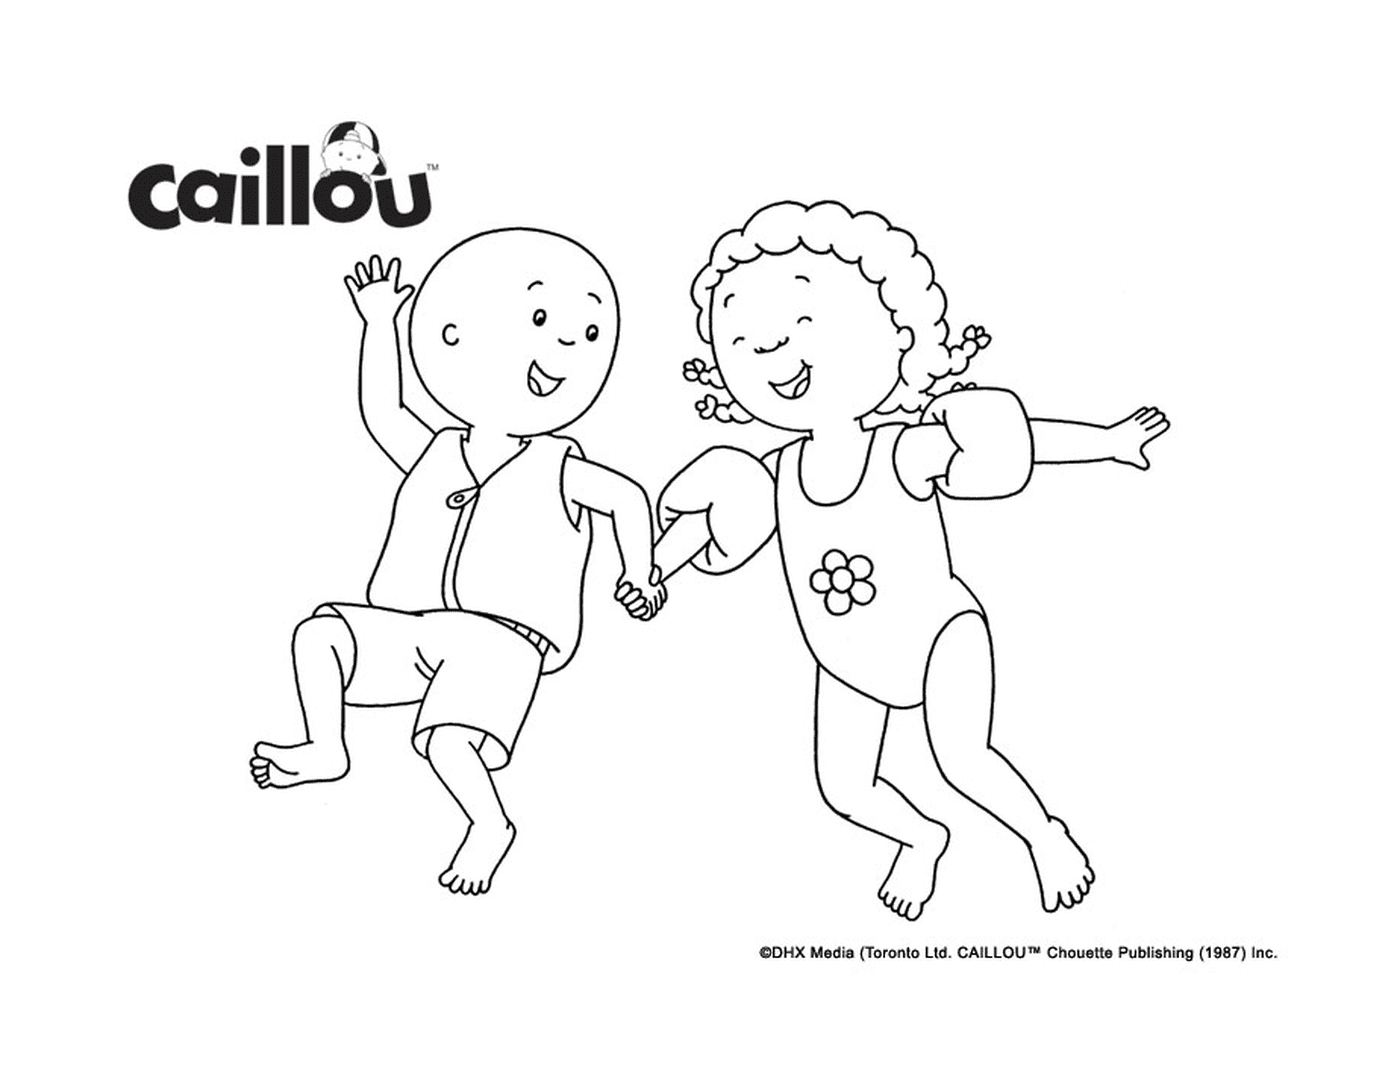  Caillou and Clementine love swimming and swimming 